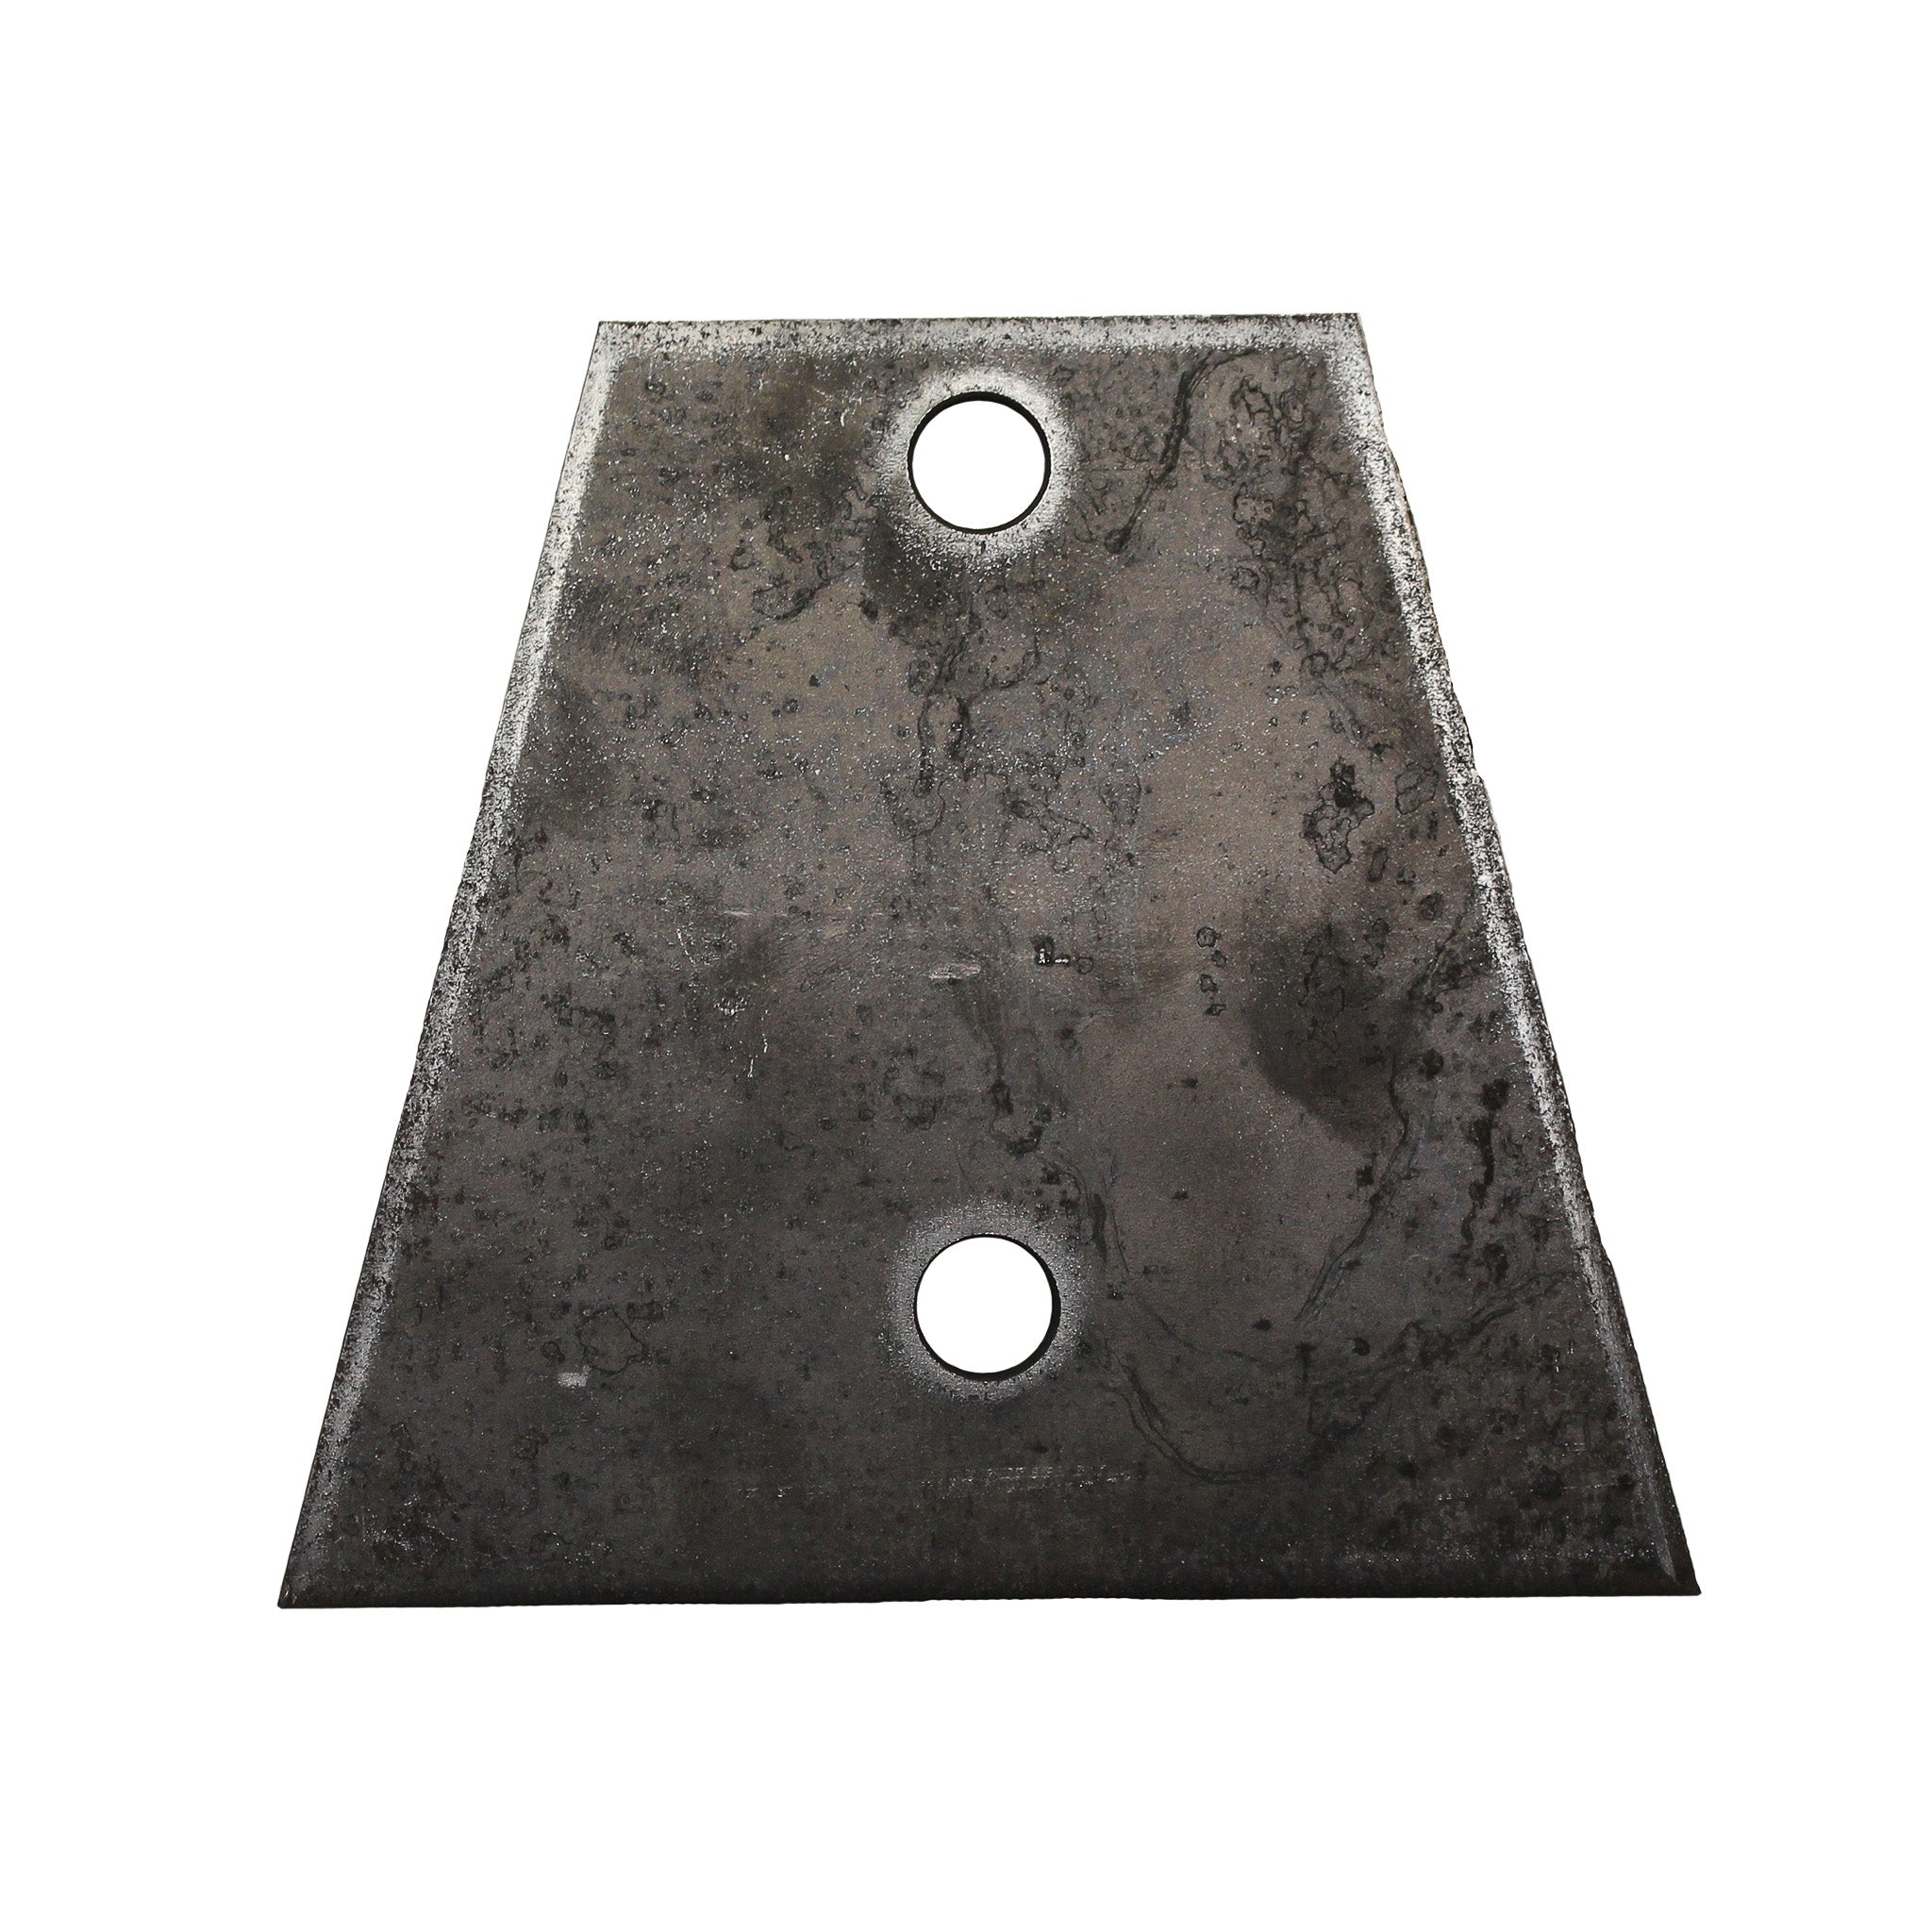 V shape coupling base plate with 2 holes for A150-2